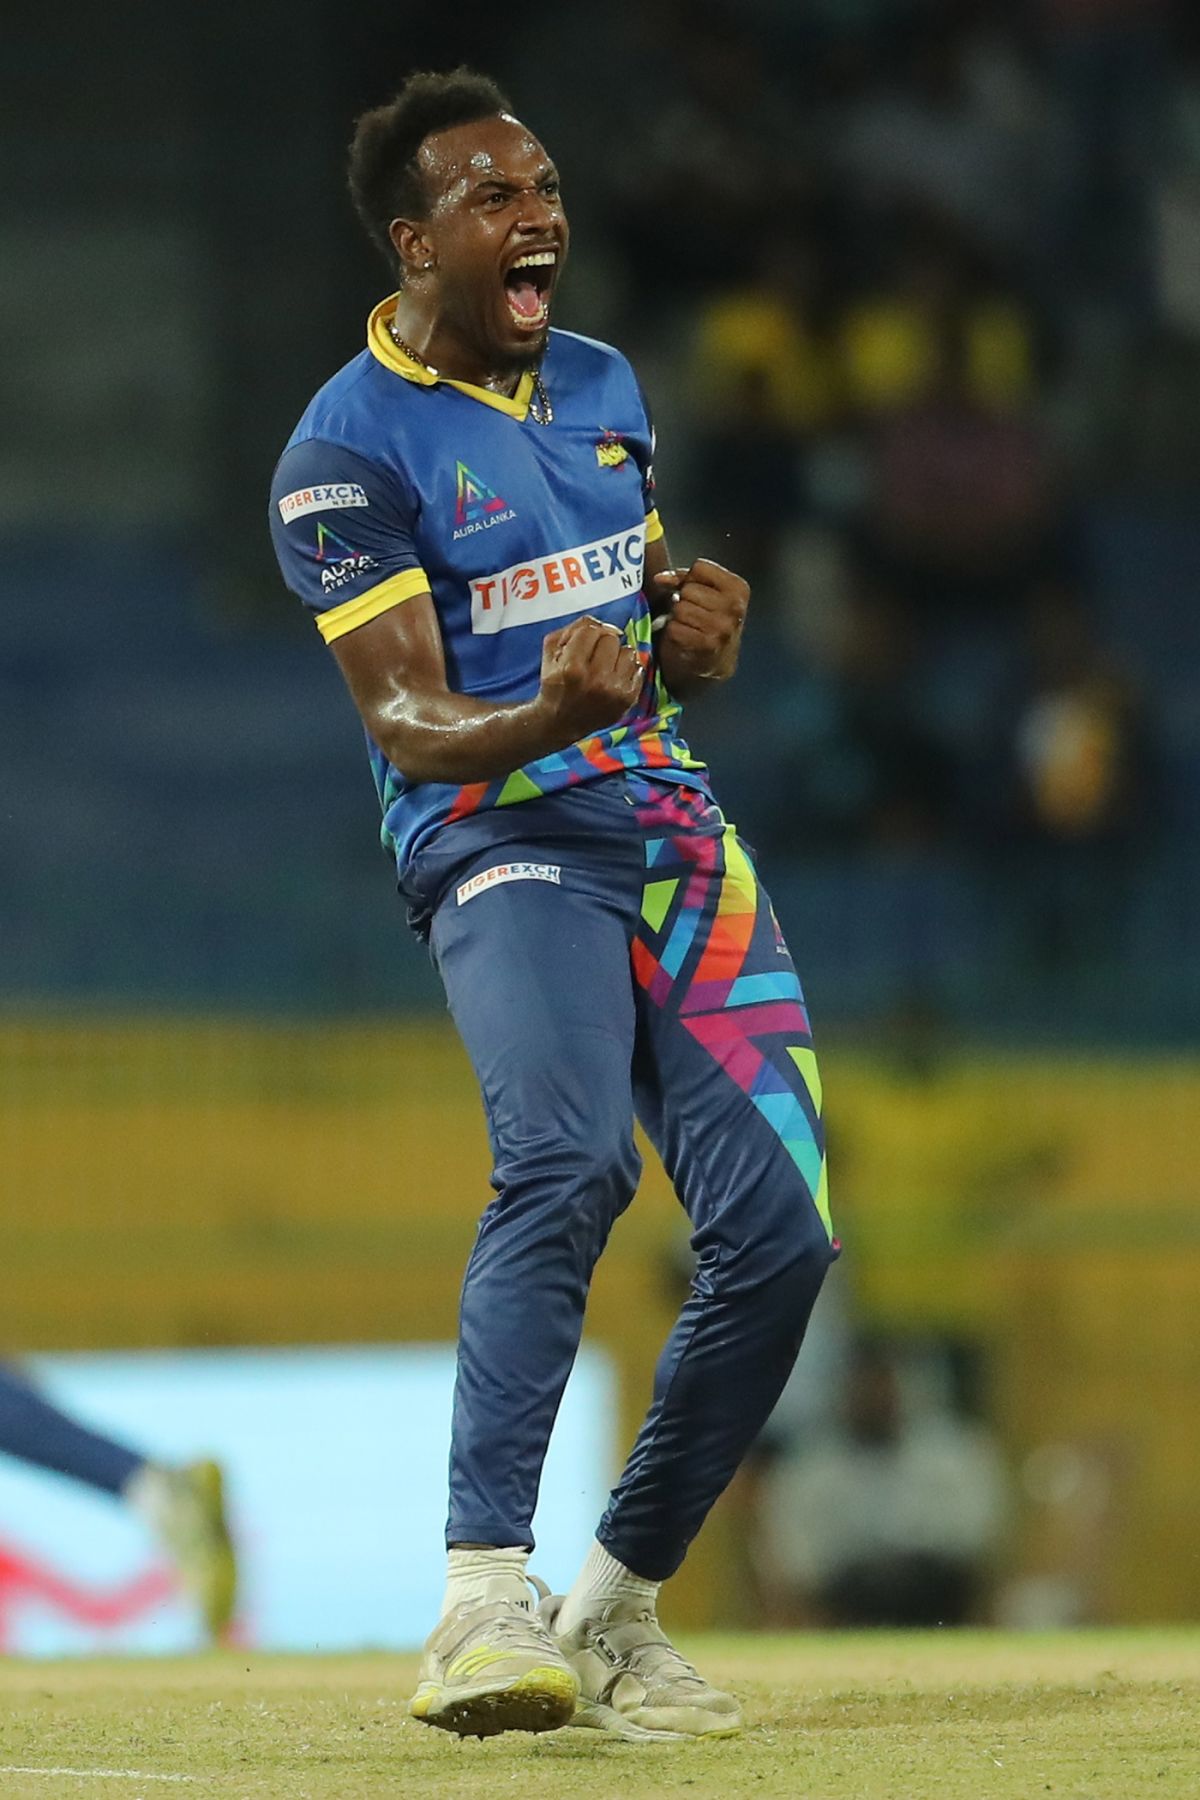 Matthew Forde picked up 4 for 11 in addition to scoring a fifty, Dambulla Aura vs Galle Gladiators, Lanka Premier League, Colombo, December 19, 2022